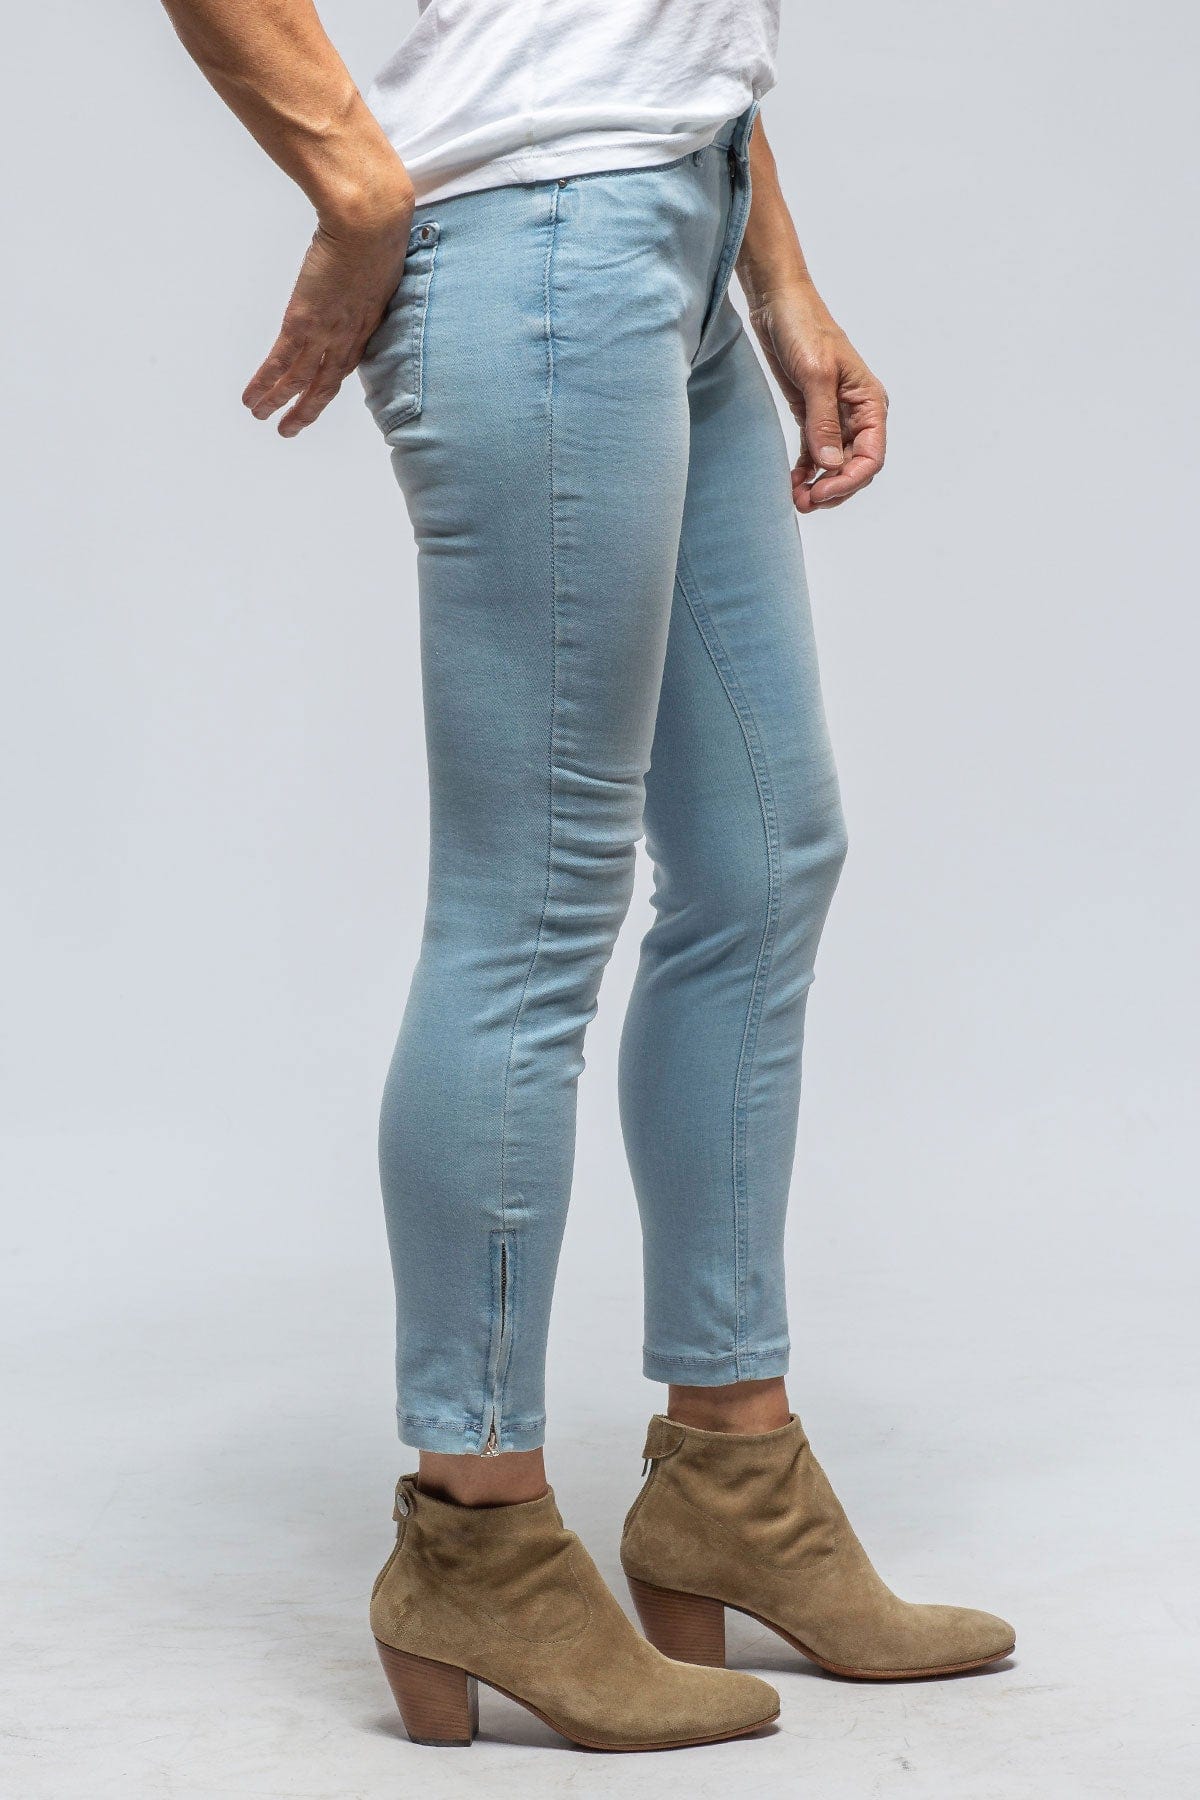 Mac Jeans MAC Dream Chic in Summer Blue Wash | Axel's of Vail